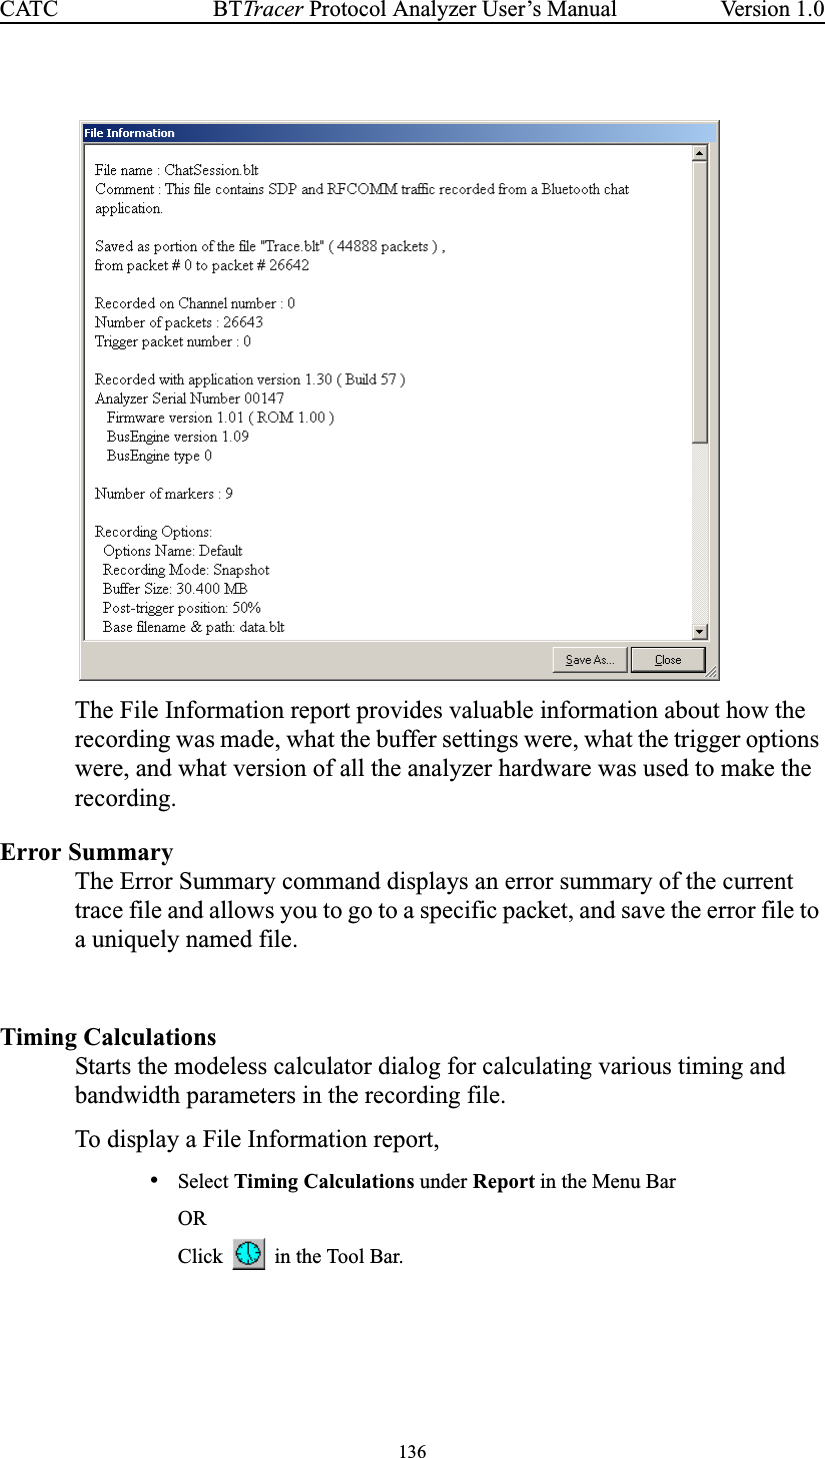 136BTTracer Protocol Analyzer User’s ManualCATC Version 1.0The File Information report provides valuable information about how therecording was made, what the buffer settings were, what the trigger optionswere, and what version of all the analyzer hardware was used to make therecording.Error SummaryThe Error Summary command displays an error summary of the currenttrace file and allows you to go to a specific packet, and save the error file toa uniquely named file.Timing CalculationsStarts the modeless calculator dialog for calculating various timing andbandwidth parameters in the recording file.To display a File Information report,•Select Timing Calculations under Report in the Menu BarORClick in the Tool Bar.